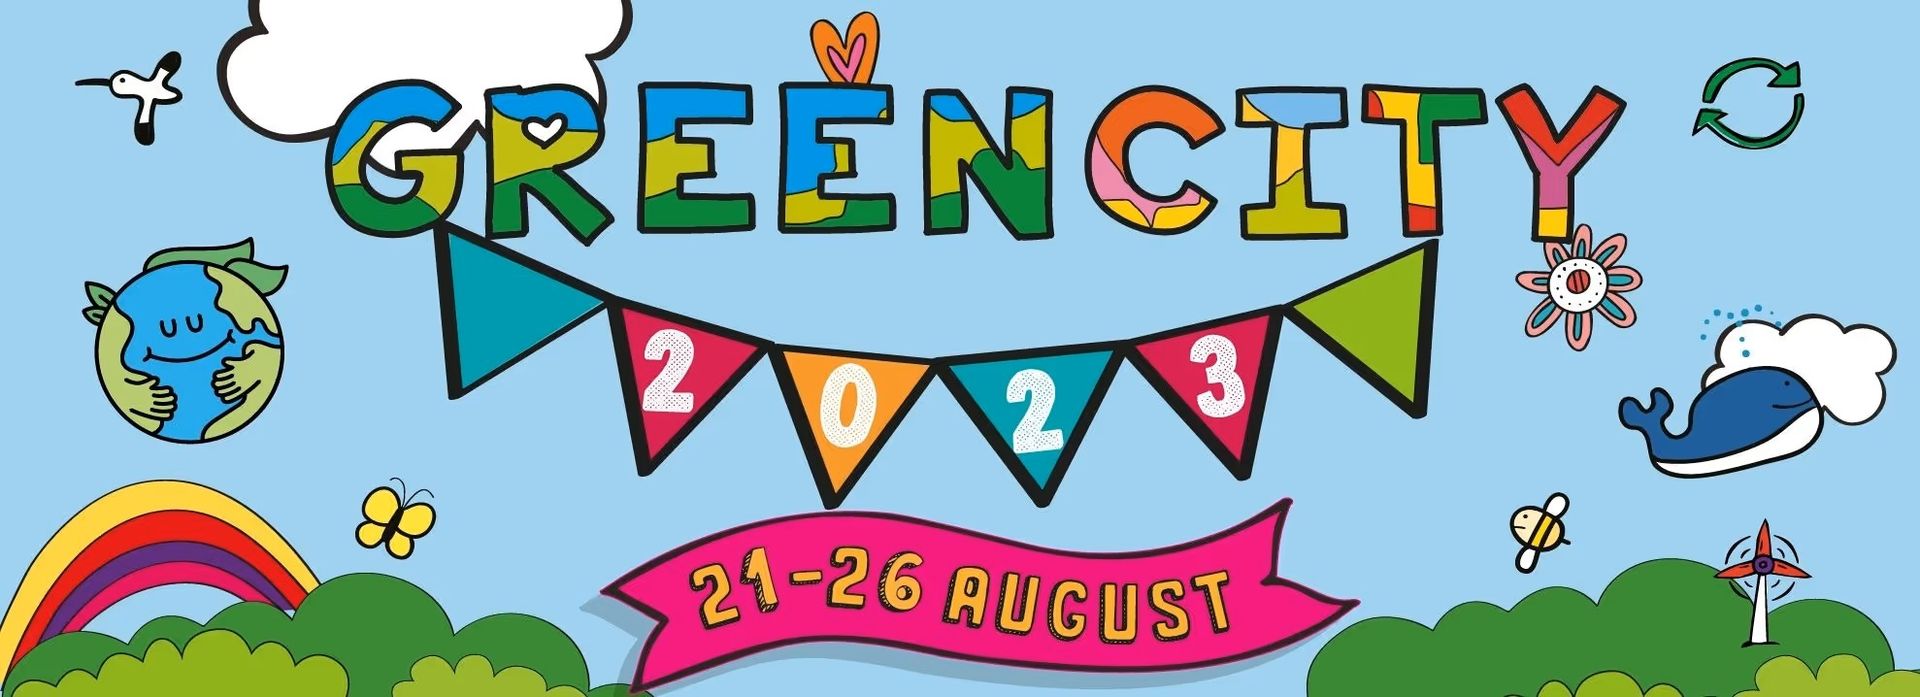 We are proud to be lead sponsors of the fantastic event Green City 2023